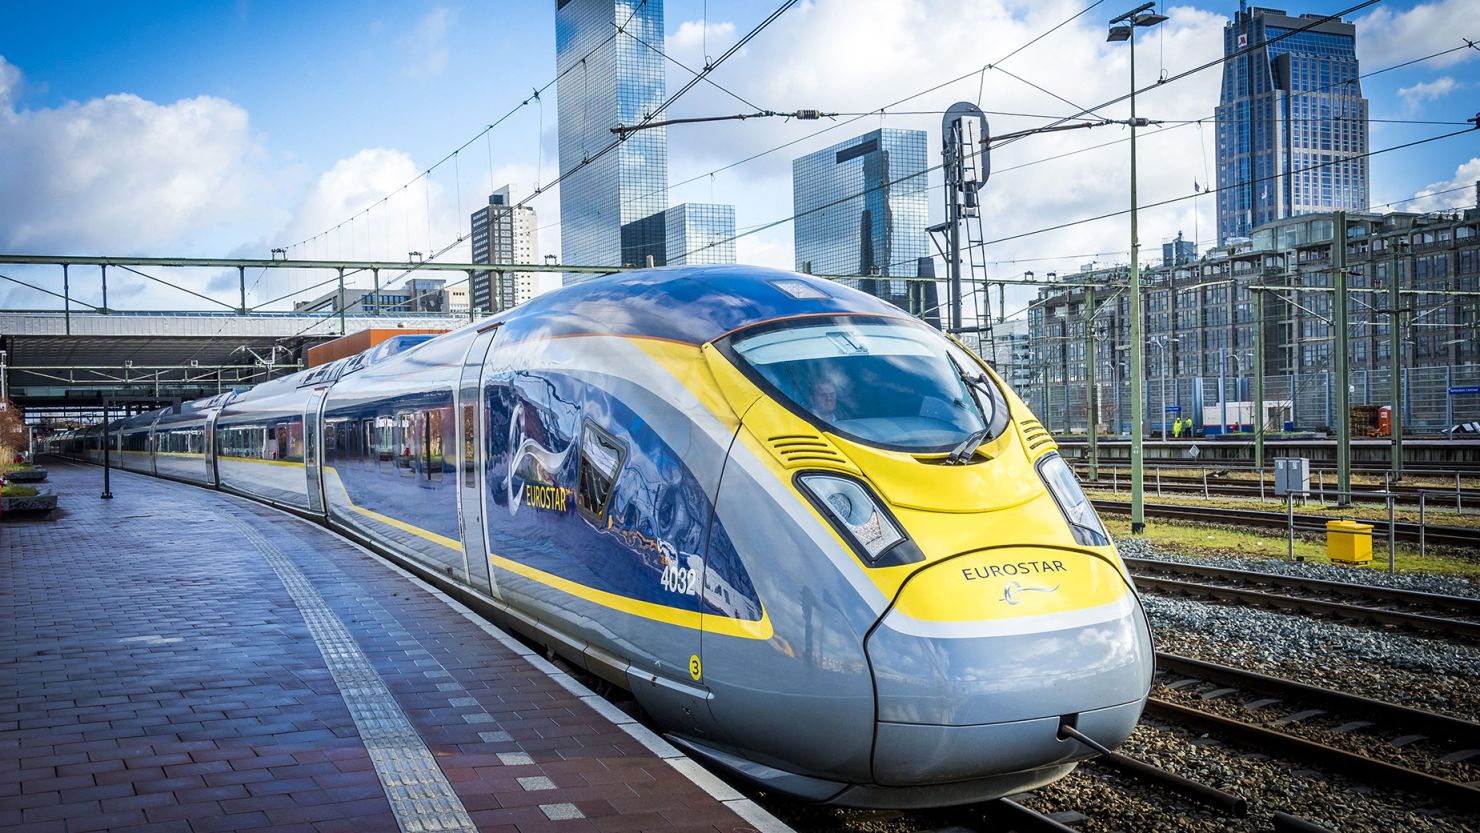 The Eurostar train arrives at Rotterdam Central Station on February 1, 2018.